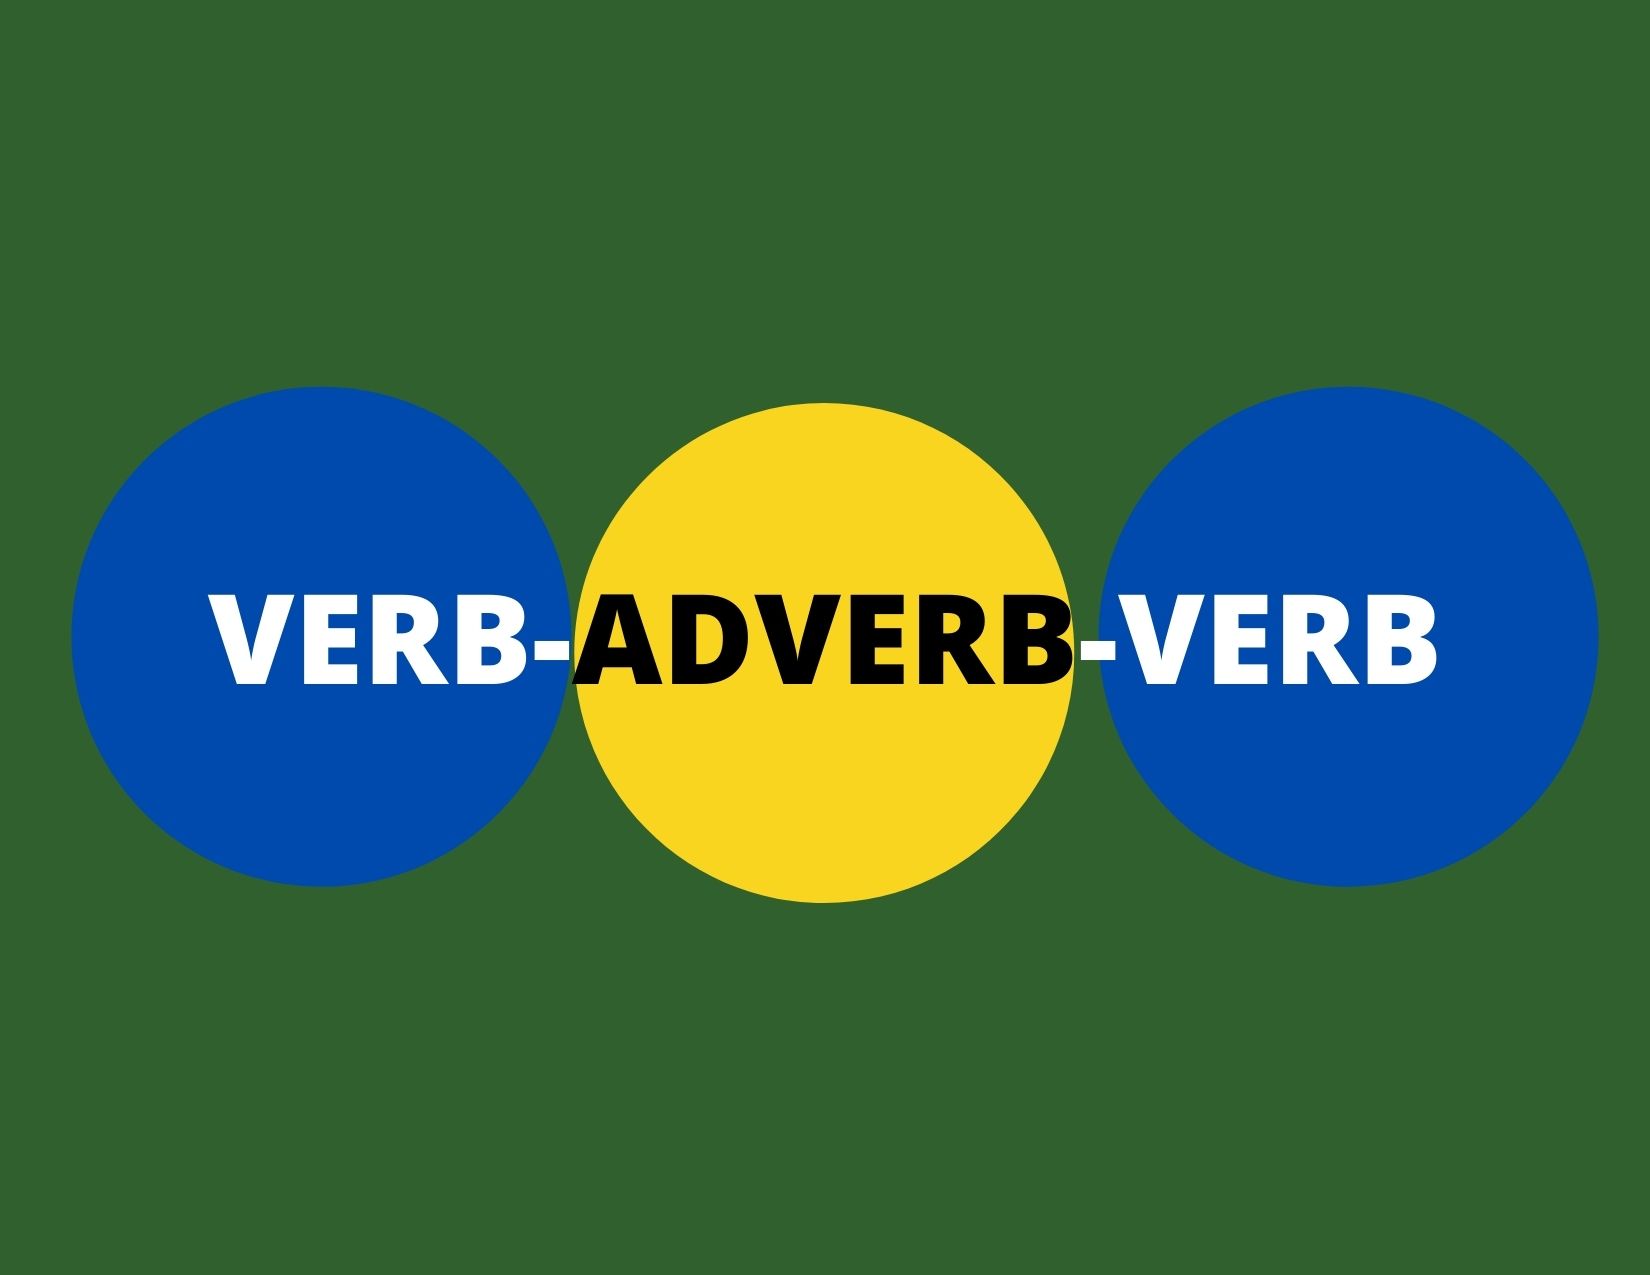 A green graphic with the words verb adverb and verb to signify the question of whether the adverb goes before or after the verb